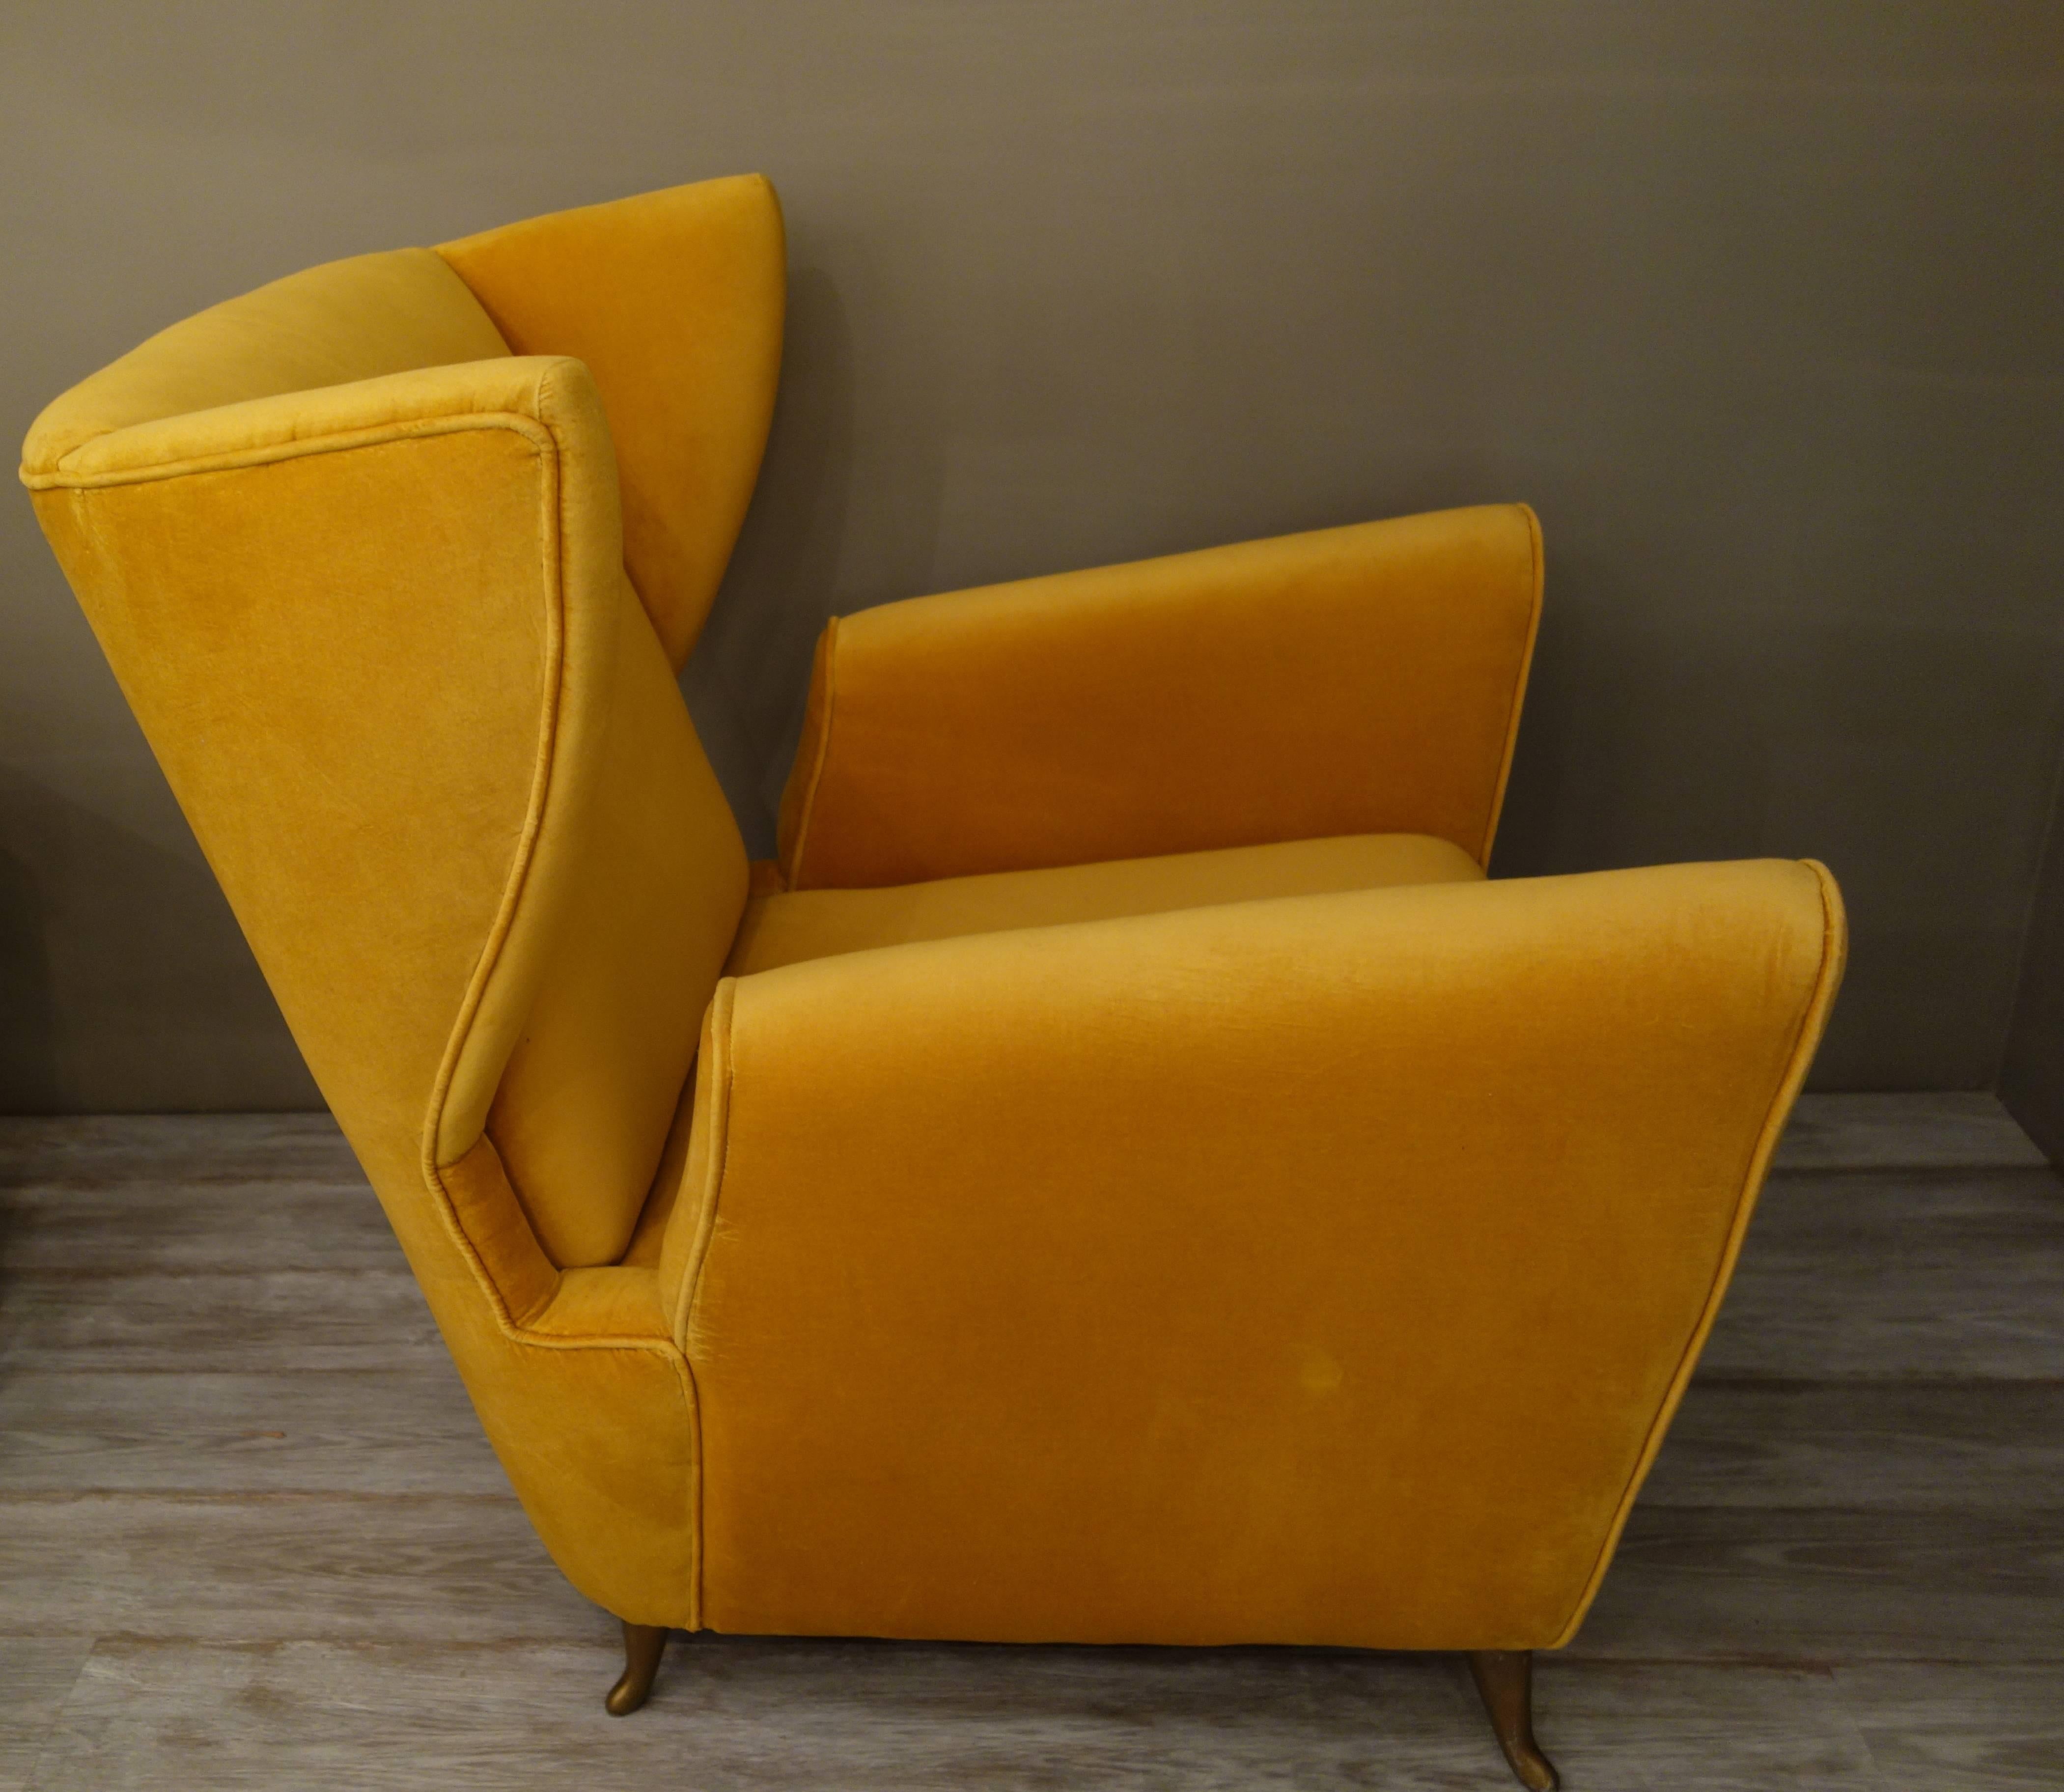 A pair of Mid-Century Italian lounge chairs or armchairs by Arredamenti ISA of generous proportions, the broad, curved, angled backs with deeply sculpted modified wings, the shaped, cutout sides forming the flared, slanted arms, with tight seats